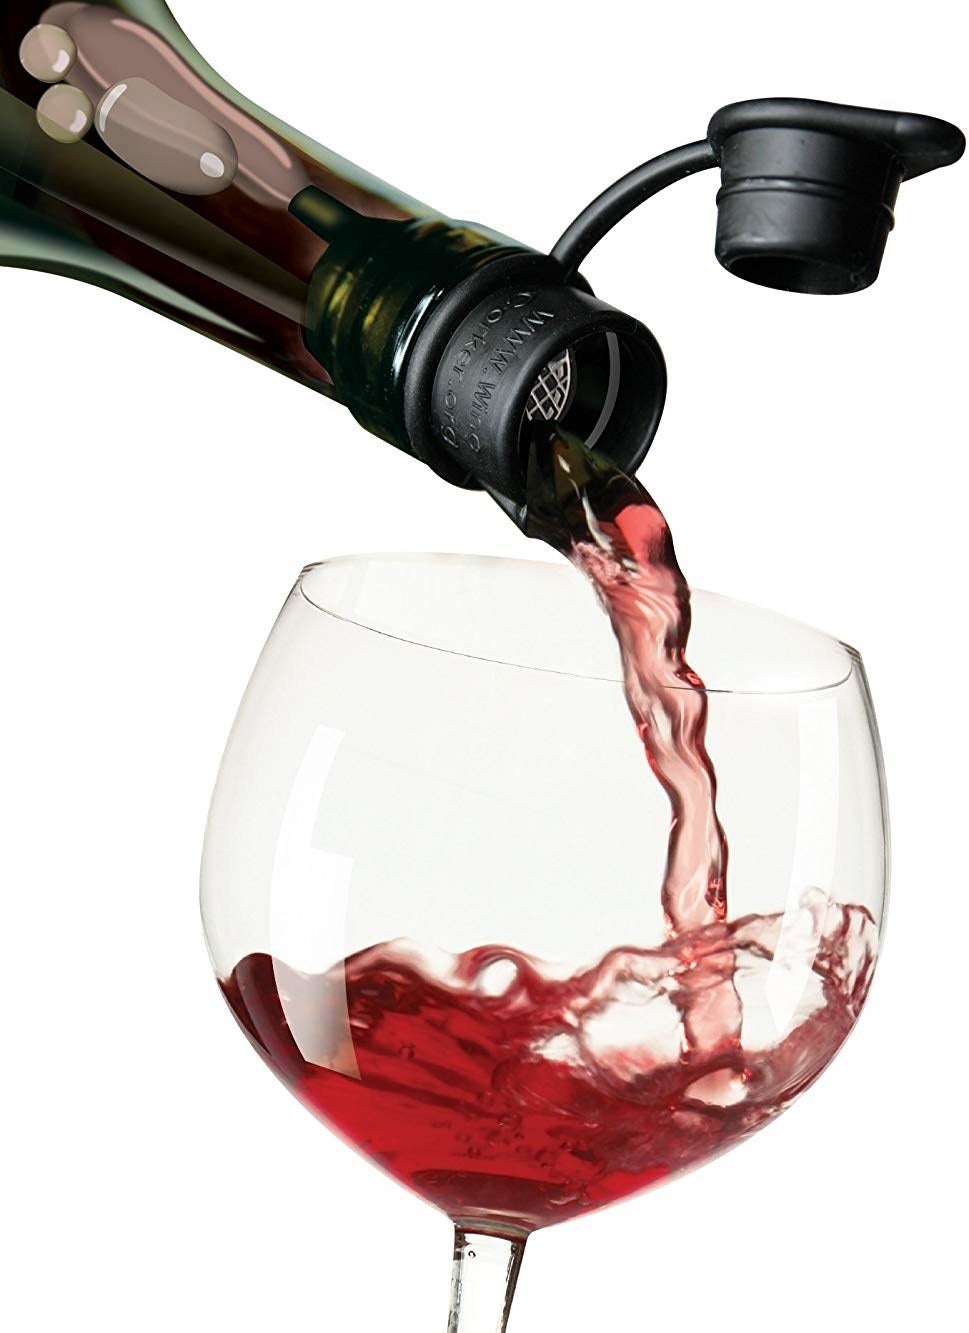 wine being poured from a bottle through the filter/pourer